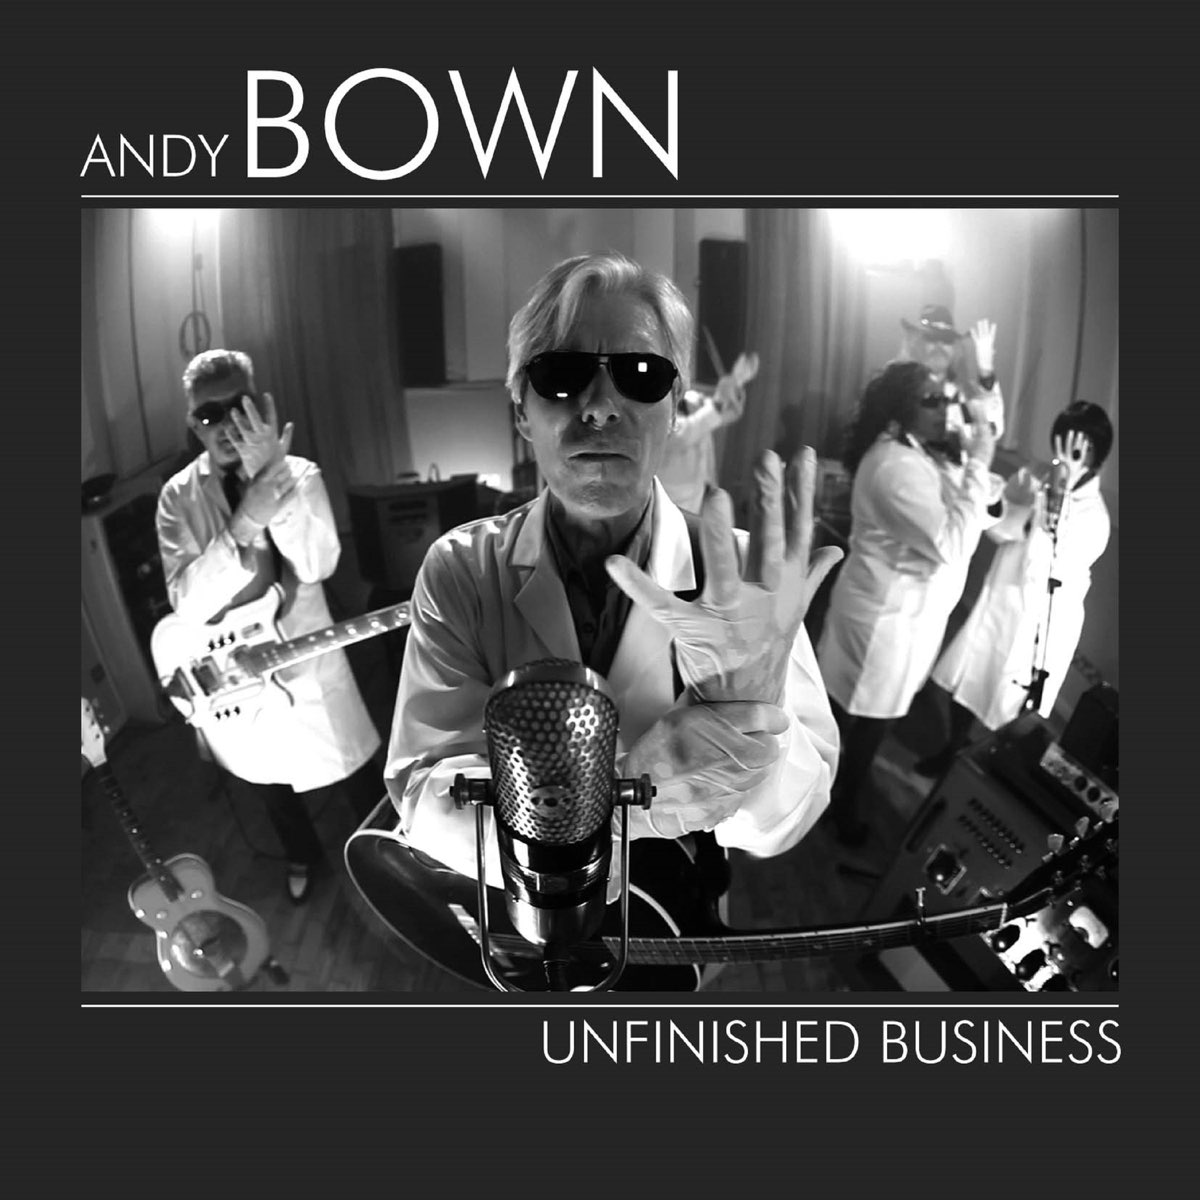 Bown. Unfinished Business. Larry Miller Unfinished Business mp3 album.